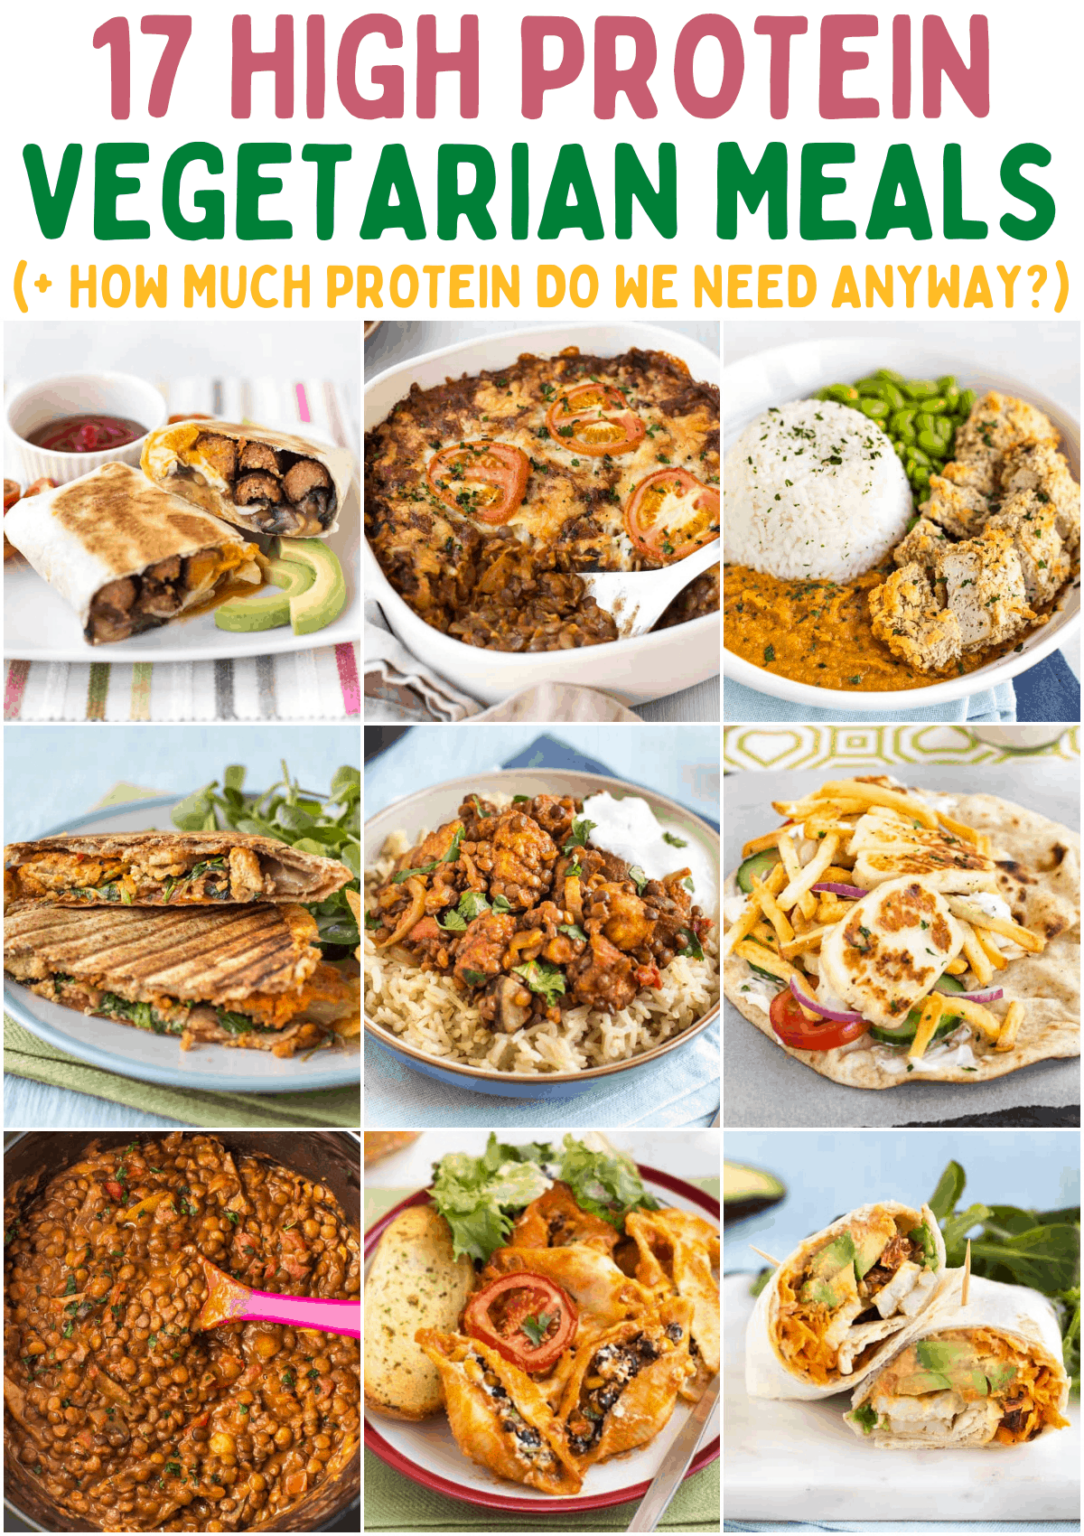 17 High Protein Vegetarian Meals How Much Protein Do We Need Anyway